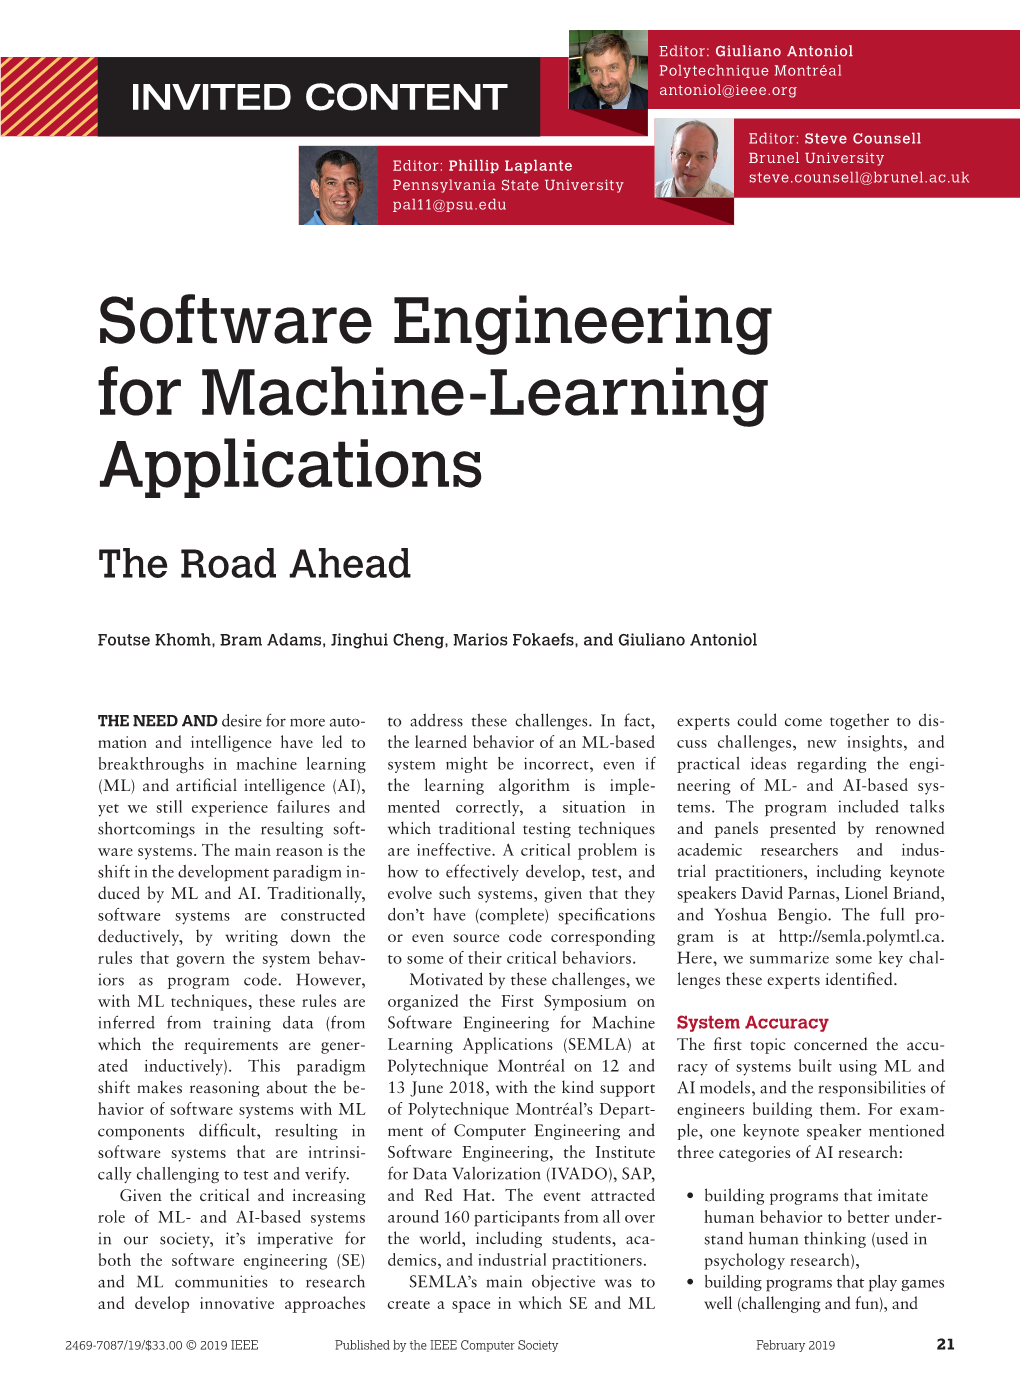 Software Engineering for Machine-Learning Applications